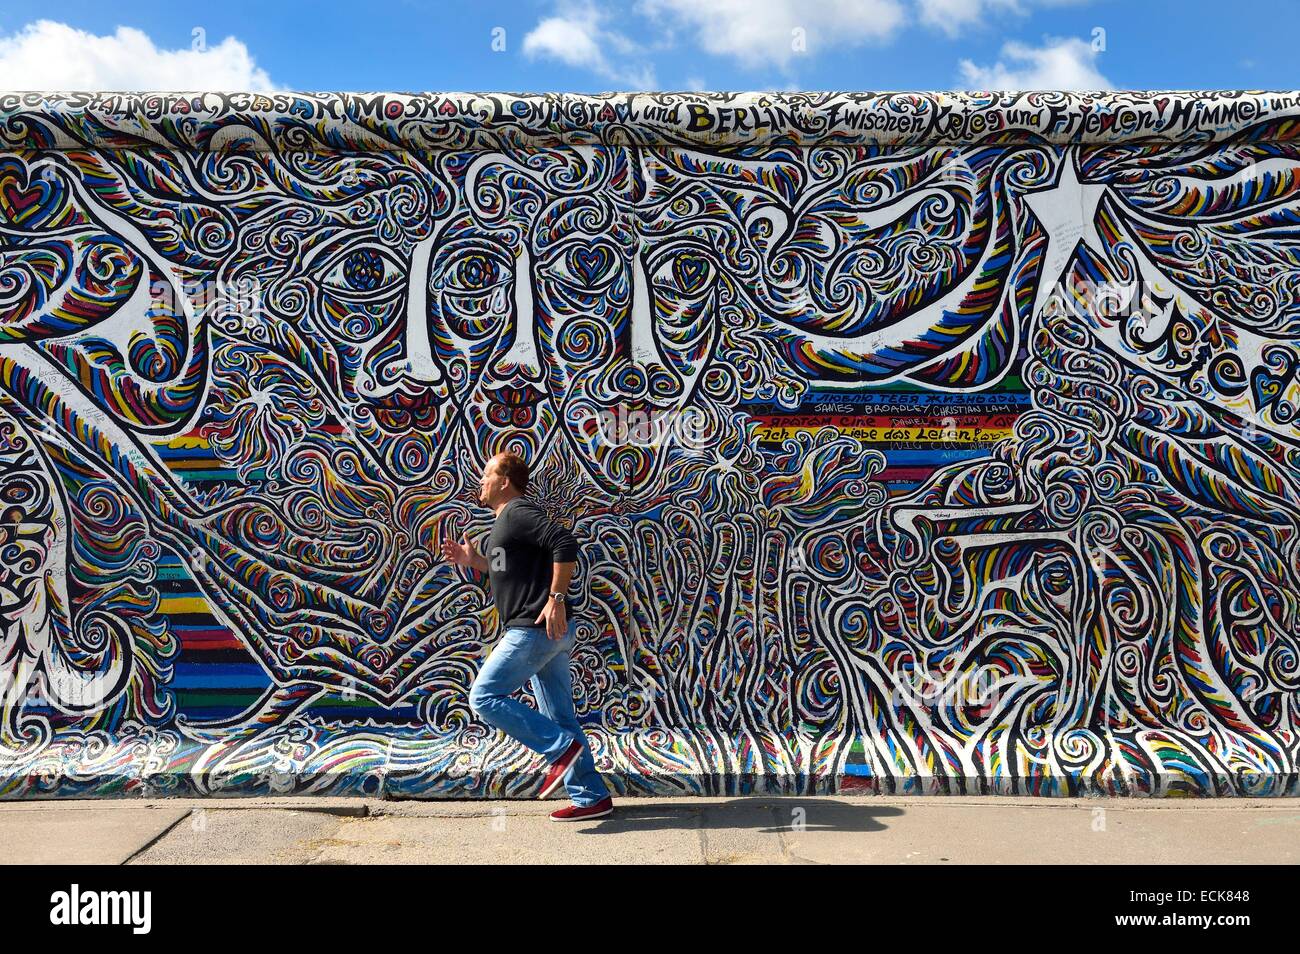 Germany, Berlin, Friedrichshain-Kreuzberg, East Side Gallery, The Wall, work by artist Schamil Gimajew dating from the 1990's renovated in 2009 Stock Photo